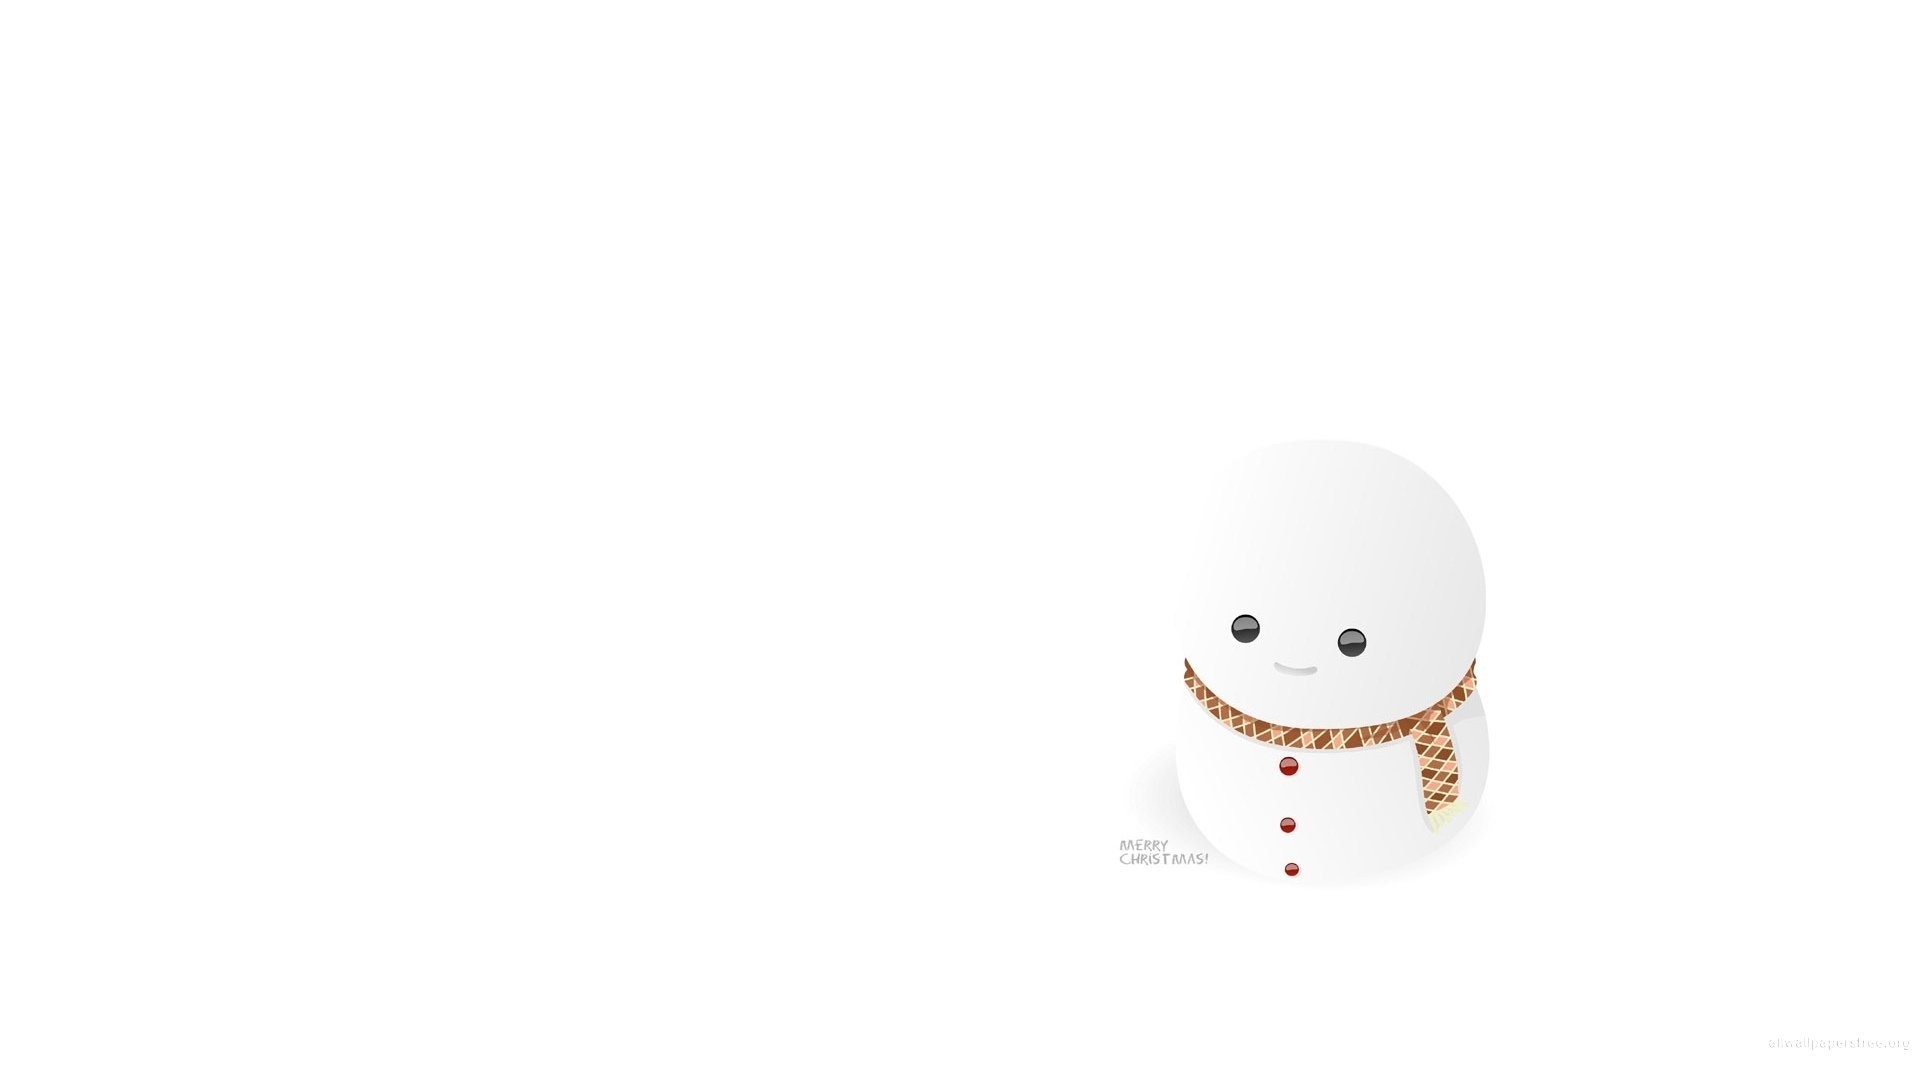 Snowman, Minimalism, White Background, Christmas, Black Background Wallpapers HD / Desktop and Mobile Backgrounds